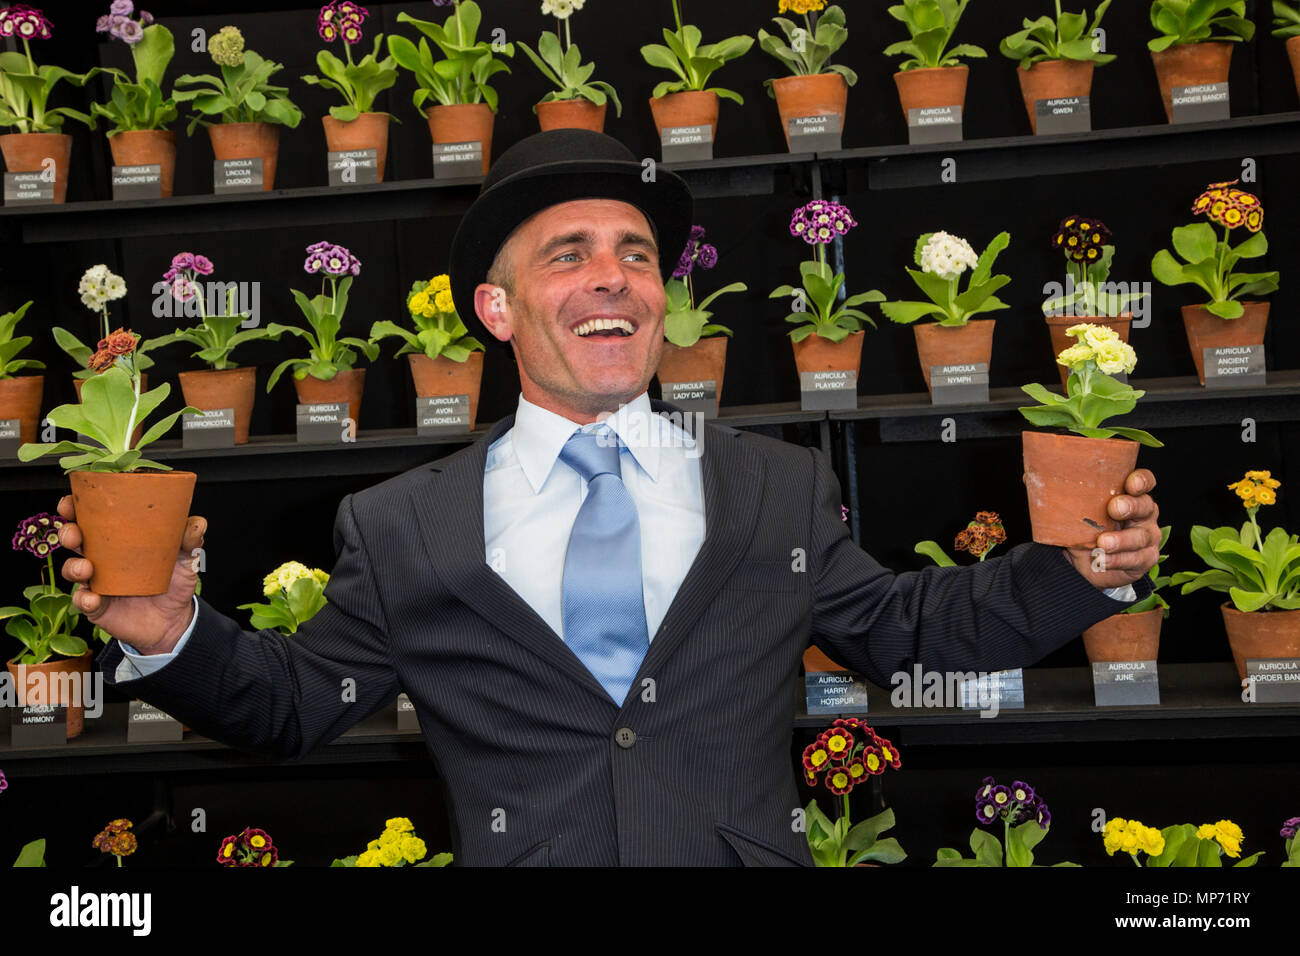 London, UK. 21 May 2018. Simon Lockyer of W & S Lockyer proudly shows off his Primula auricula plants. Press Day at the 2018 RHS Chelsea Flower Show which opens to the public on tomorrow. Photo: Bettina Strenske/Alamy Live News Stock Photo